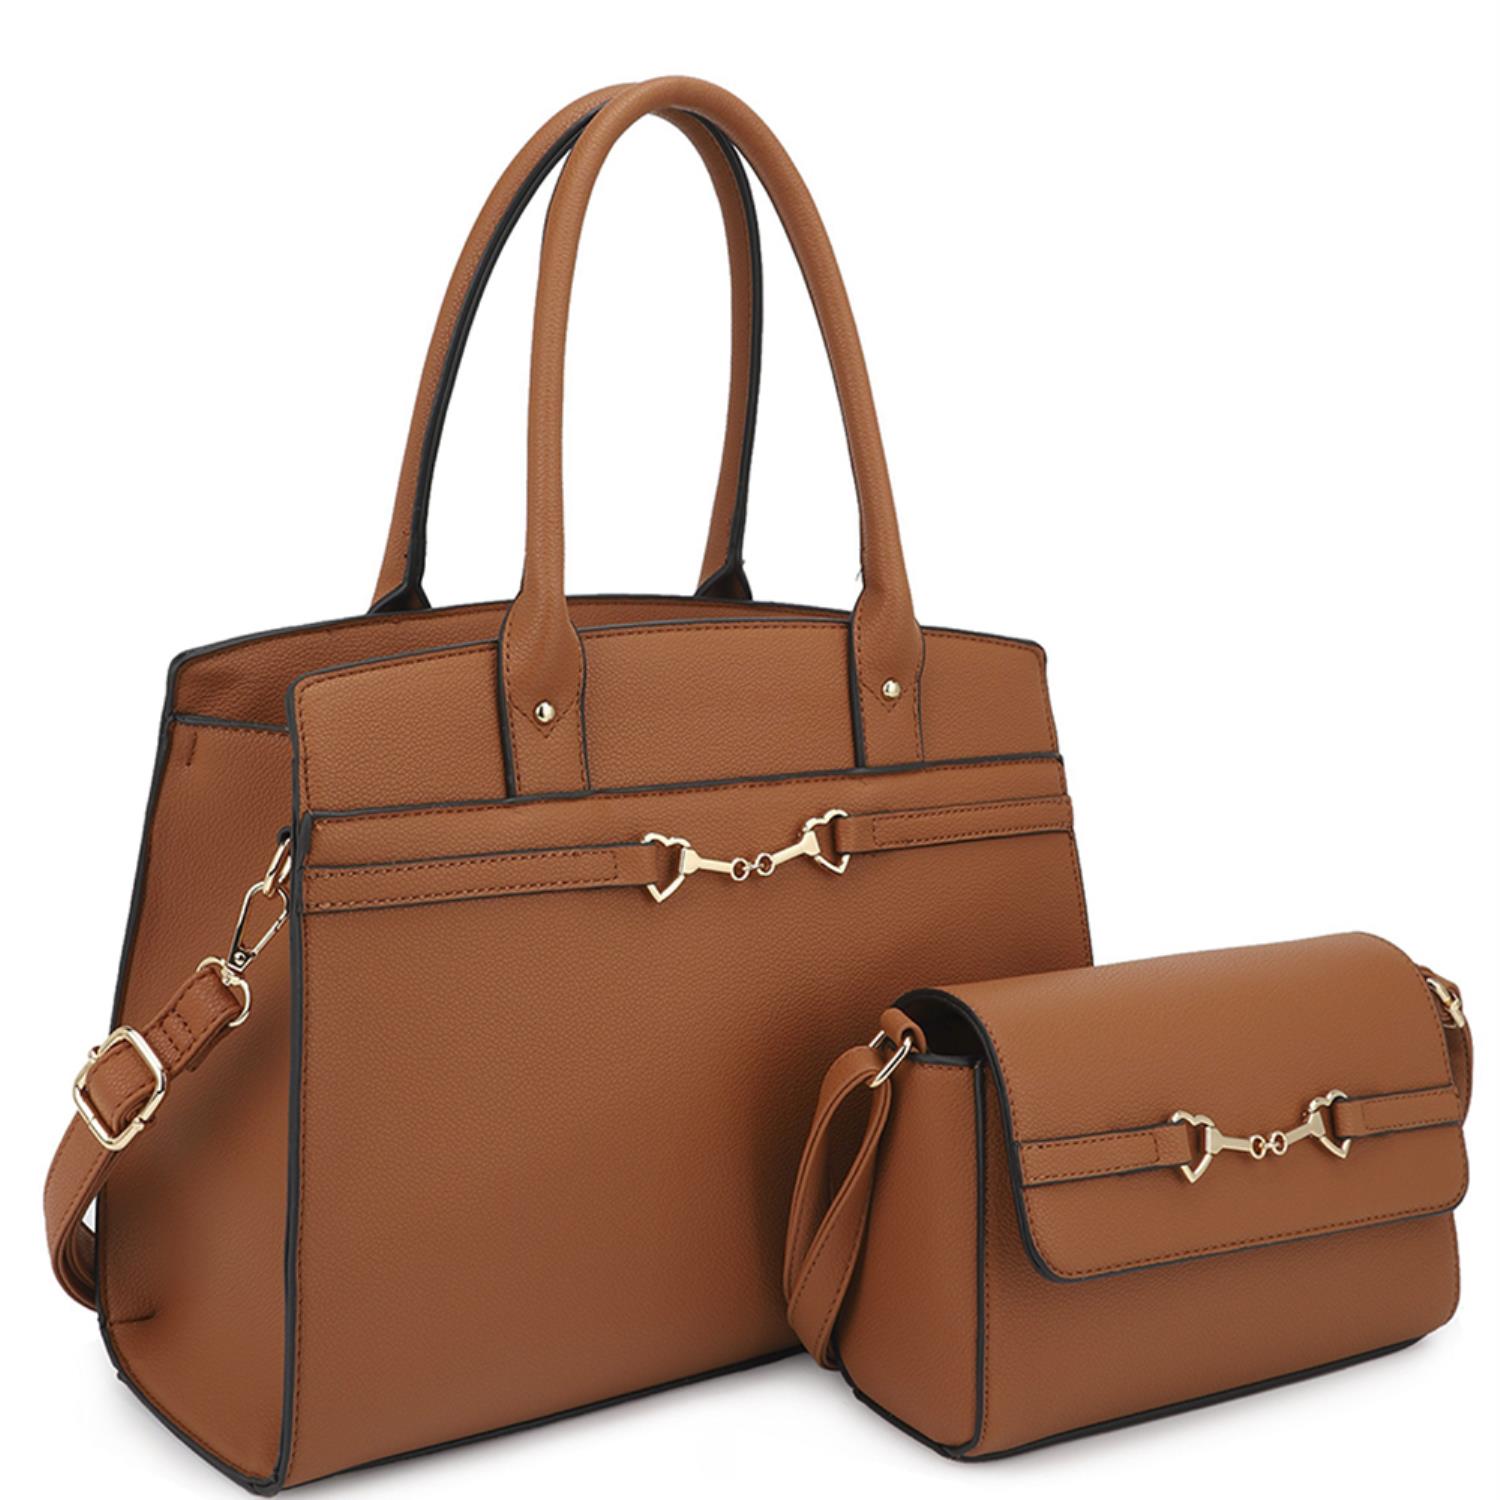 Brown - 2in1 Matching Design Handle Satchel With Crossbody Bag - 5 colors - handbag at TFC&H Co.